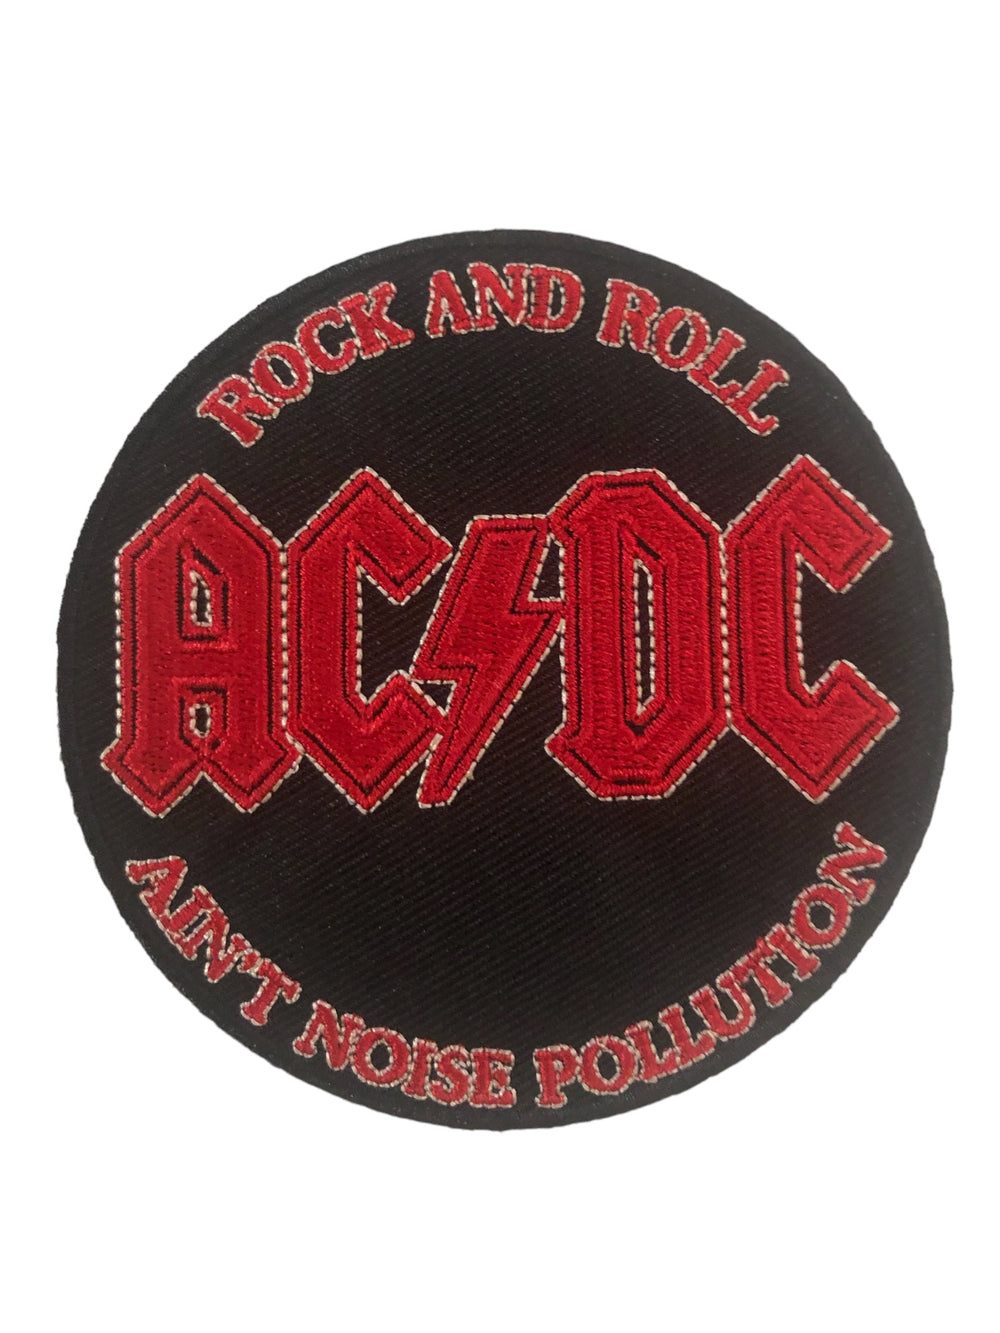 AC/DC Noise Pollution Official Woven Patch Brand New